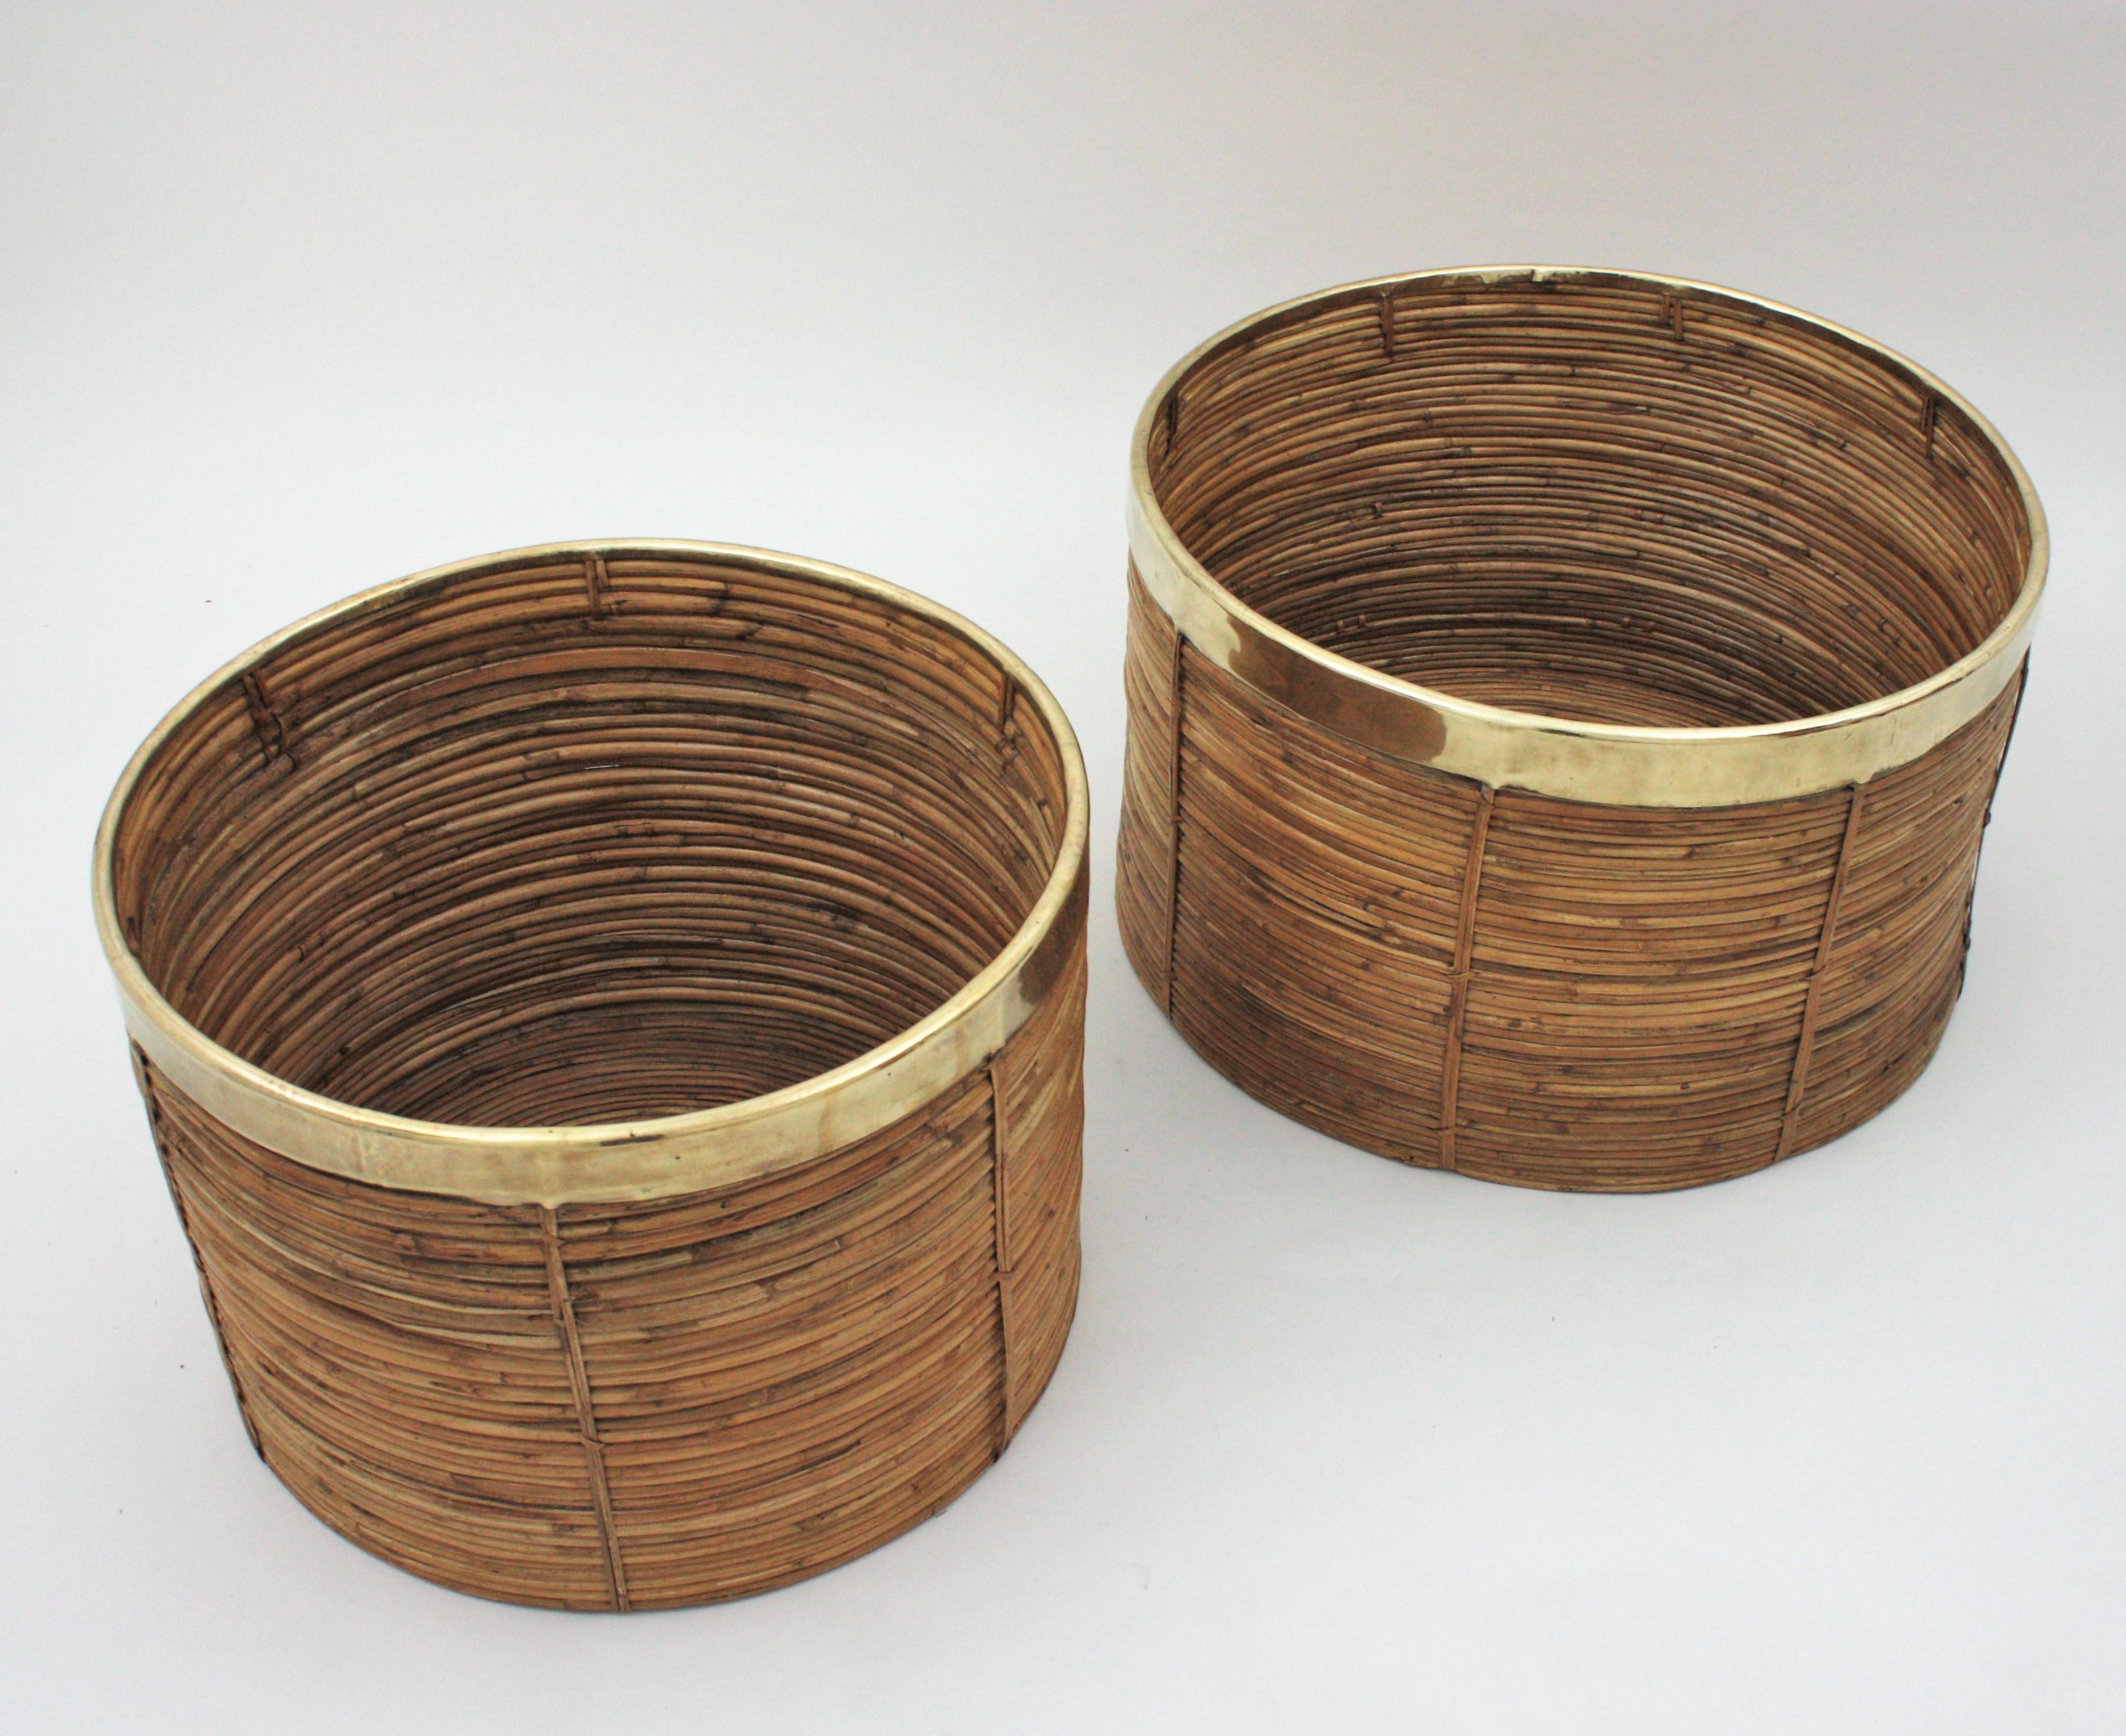 Pair of Extra Large Rattan Round Planters with Brass Rim, Italy, 1970s For Sale 4